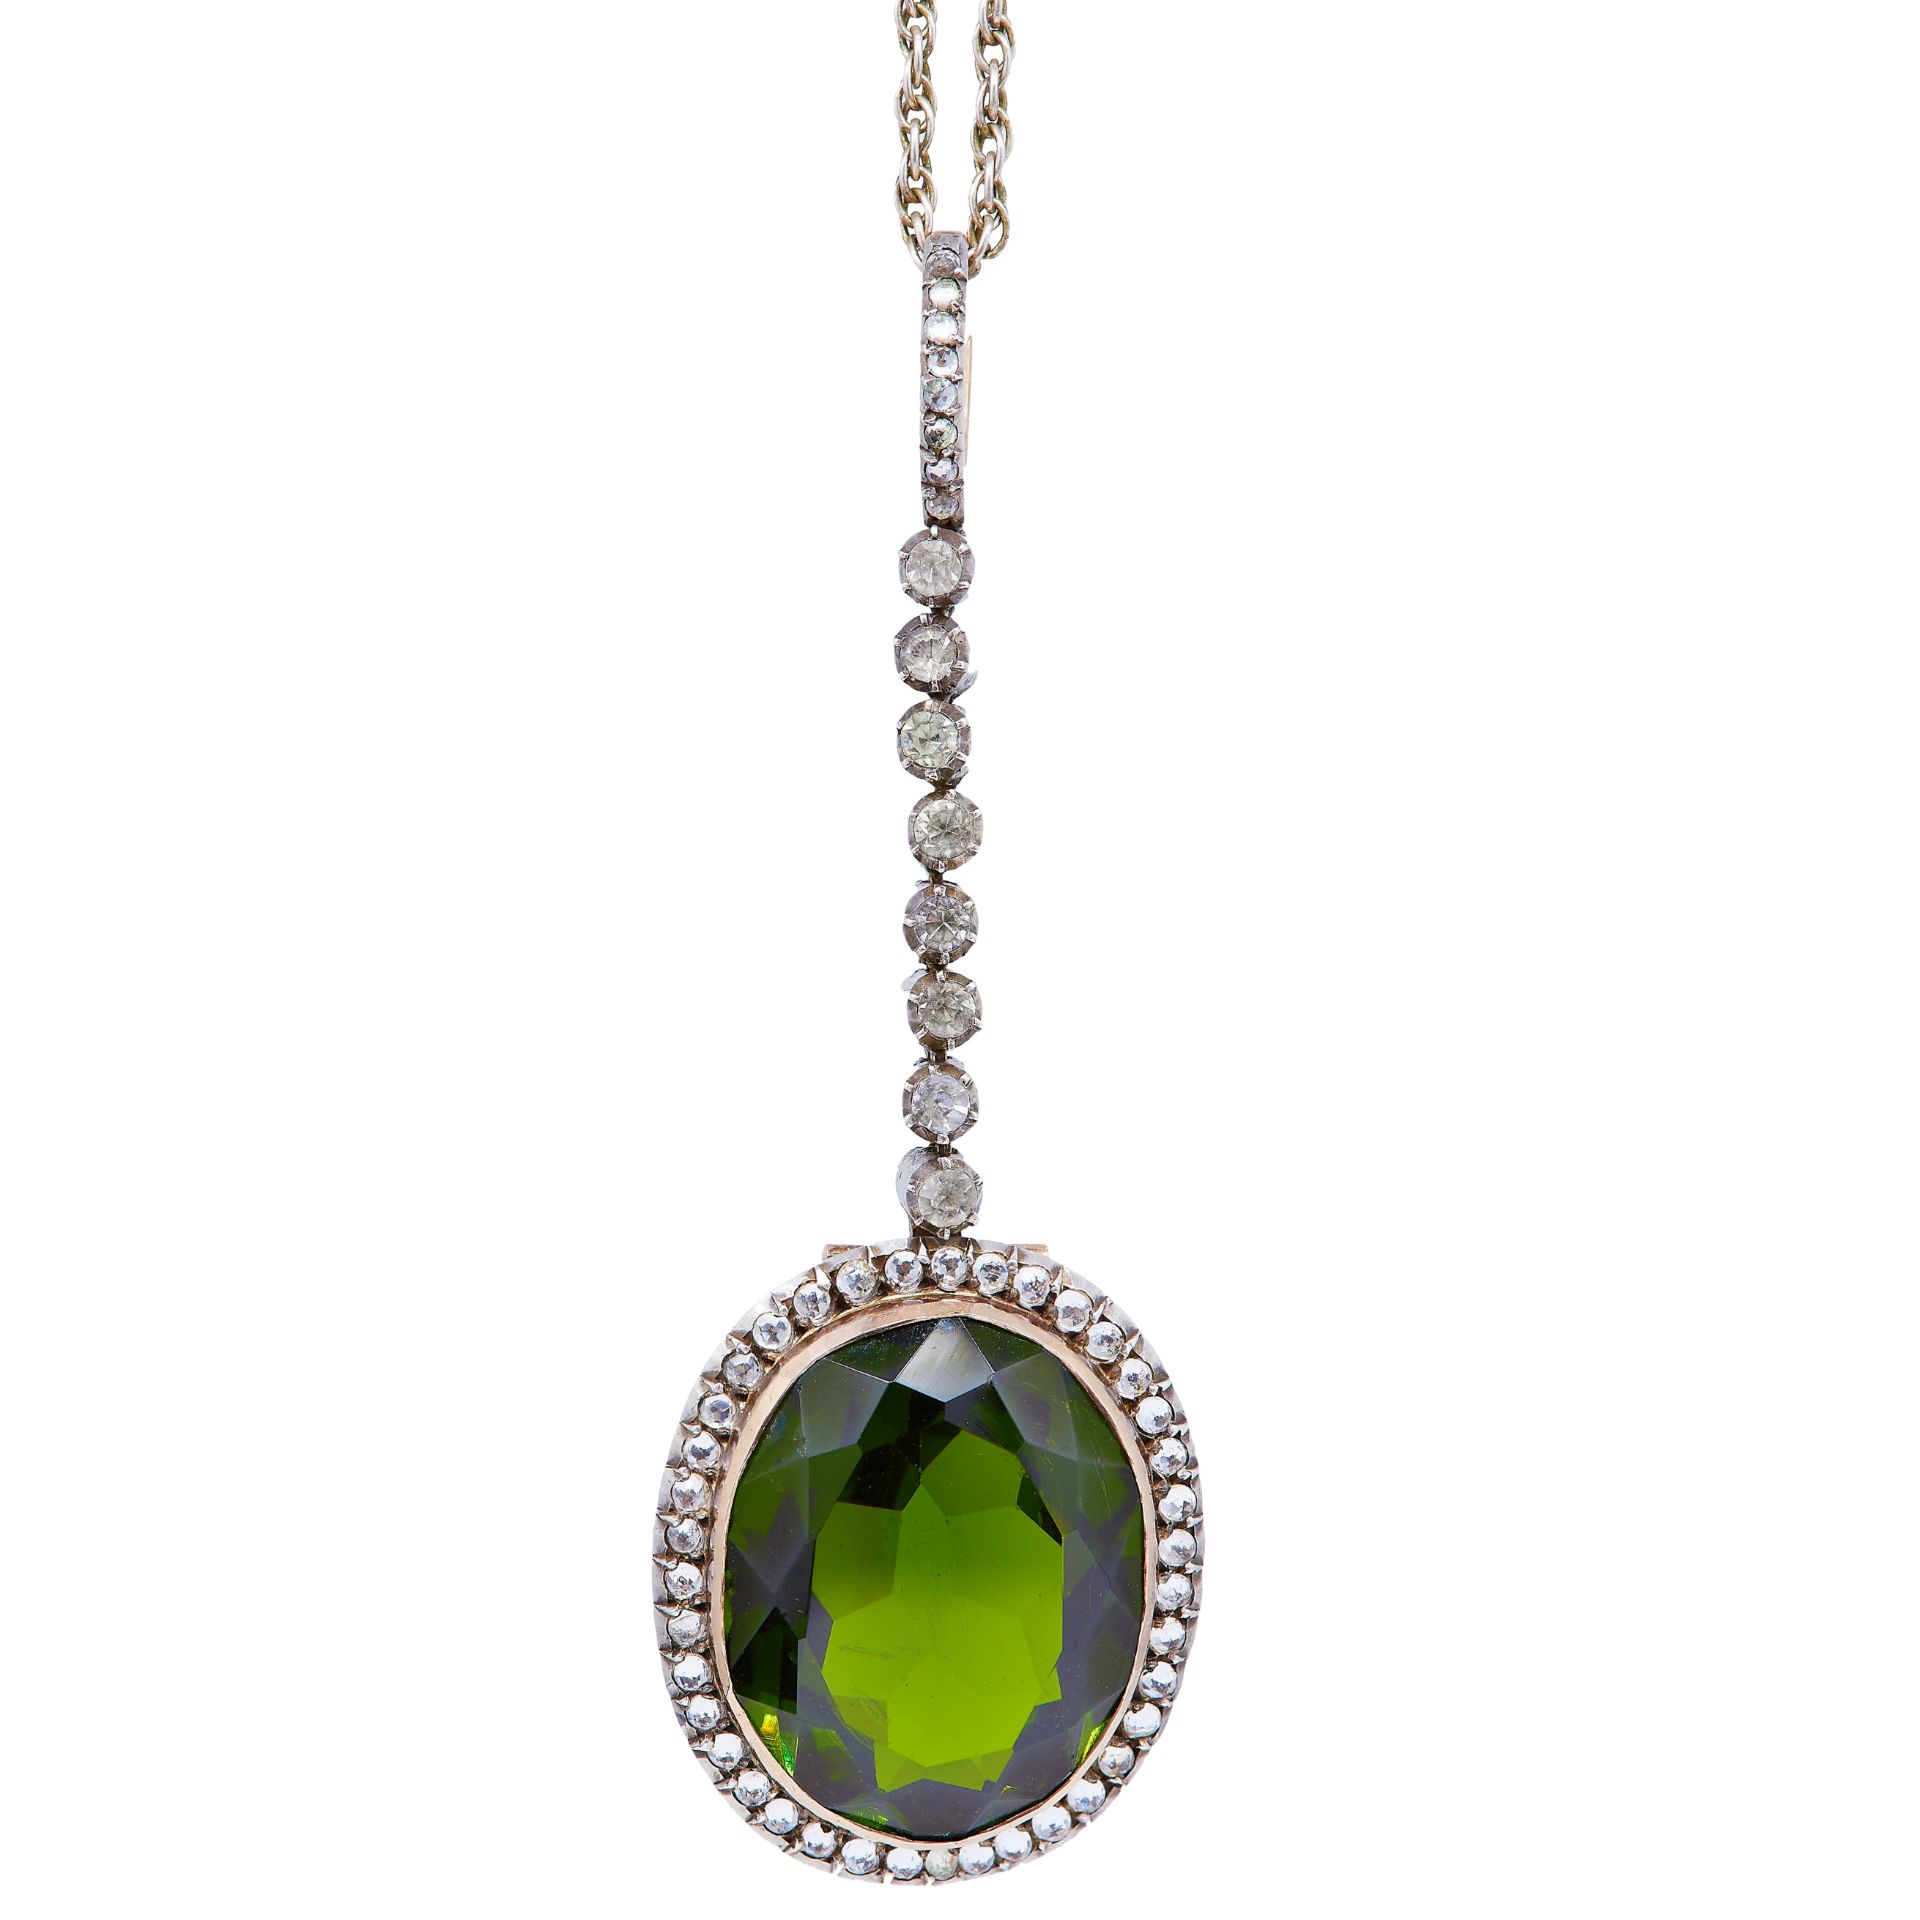 GREEN STONE AND PASTE PENDANT NECKLACE - Image 2 of 2